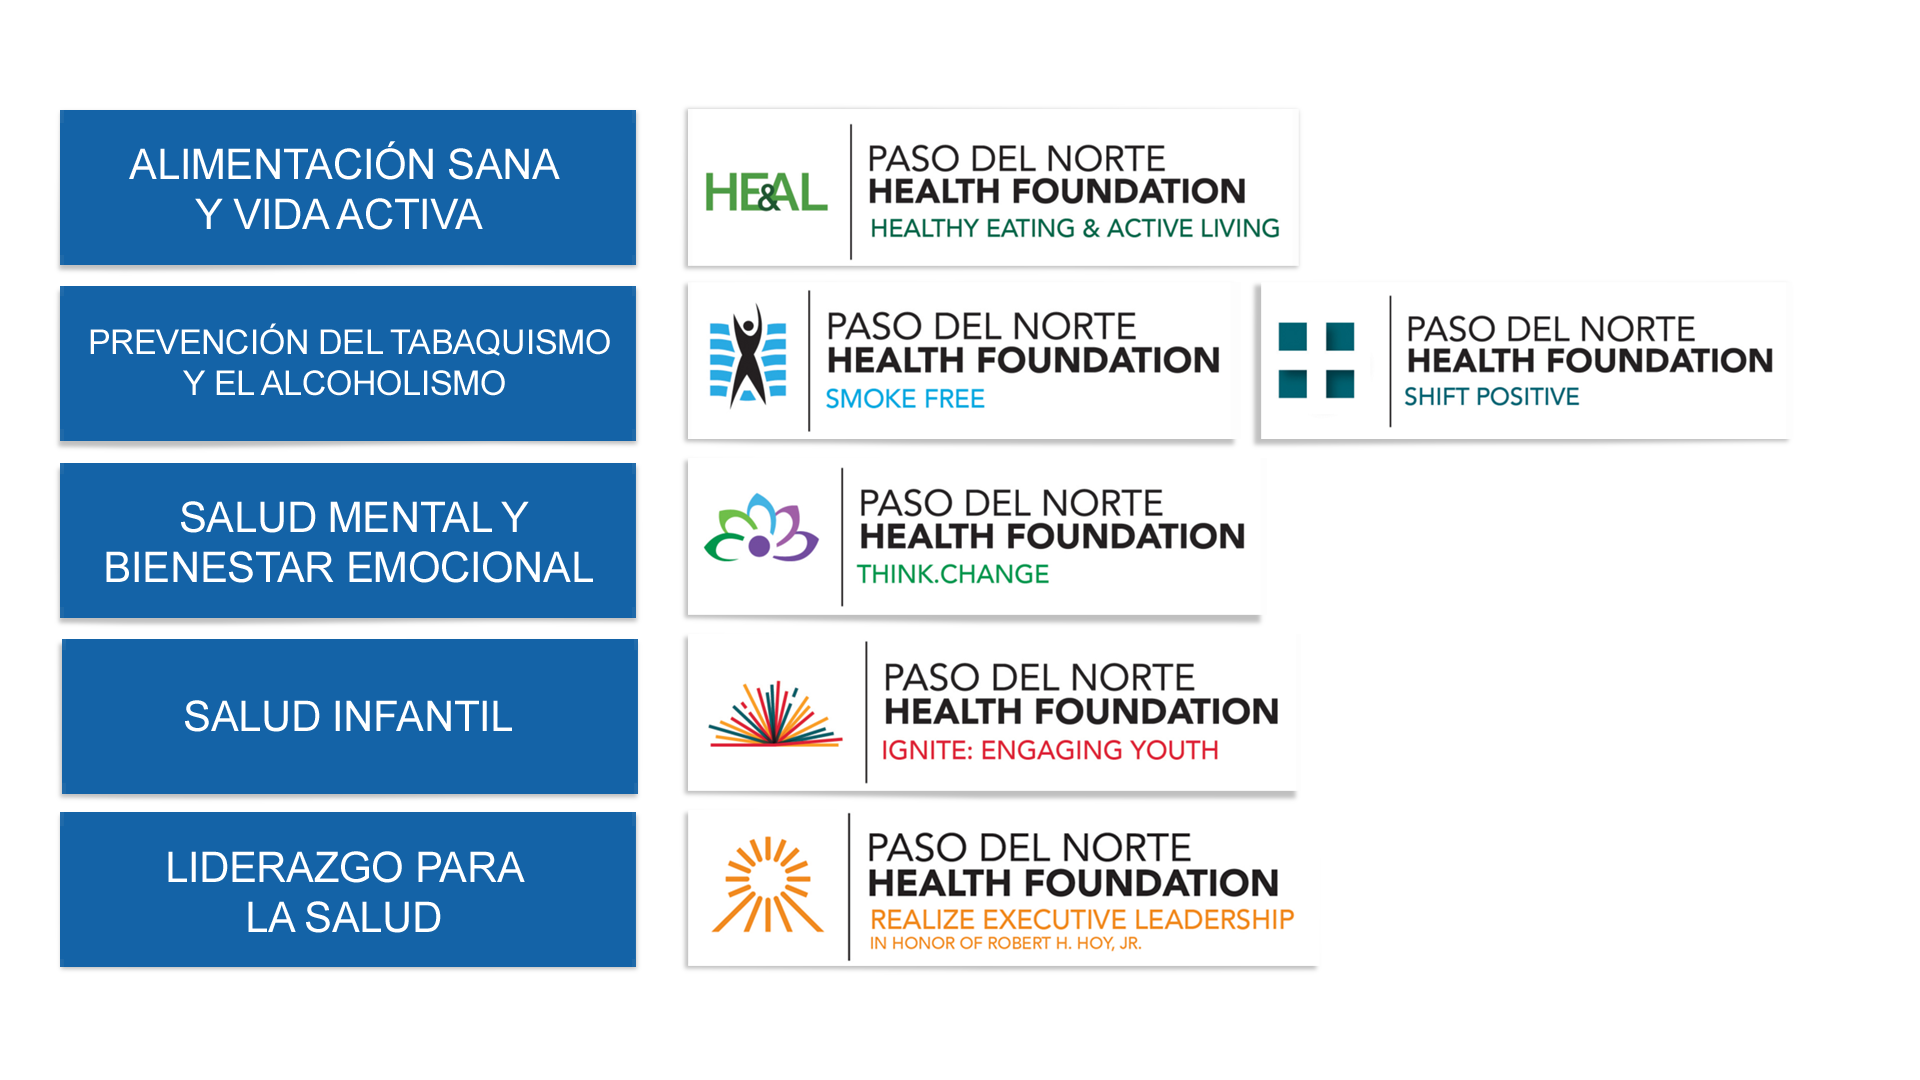 Priority Areas and Health Initiatives